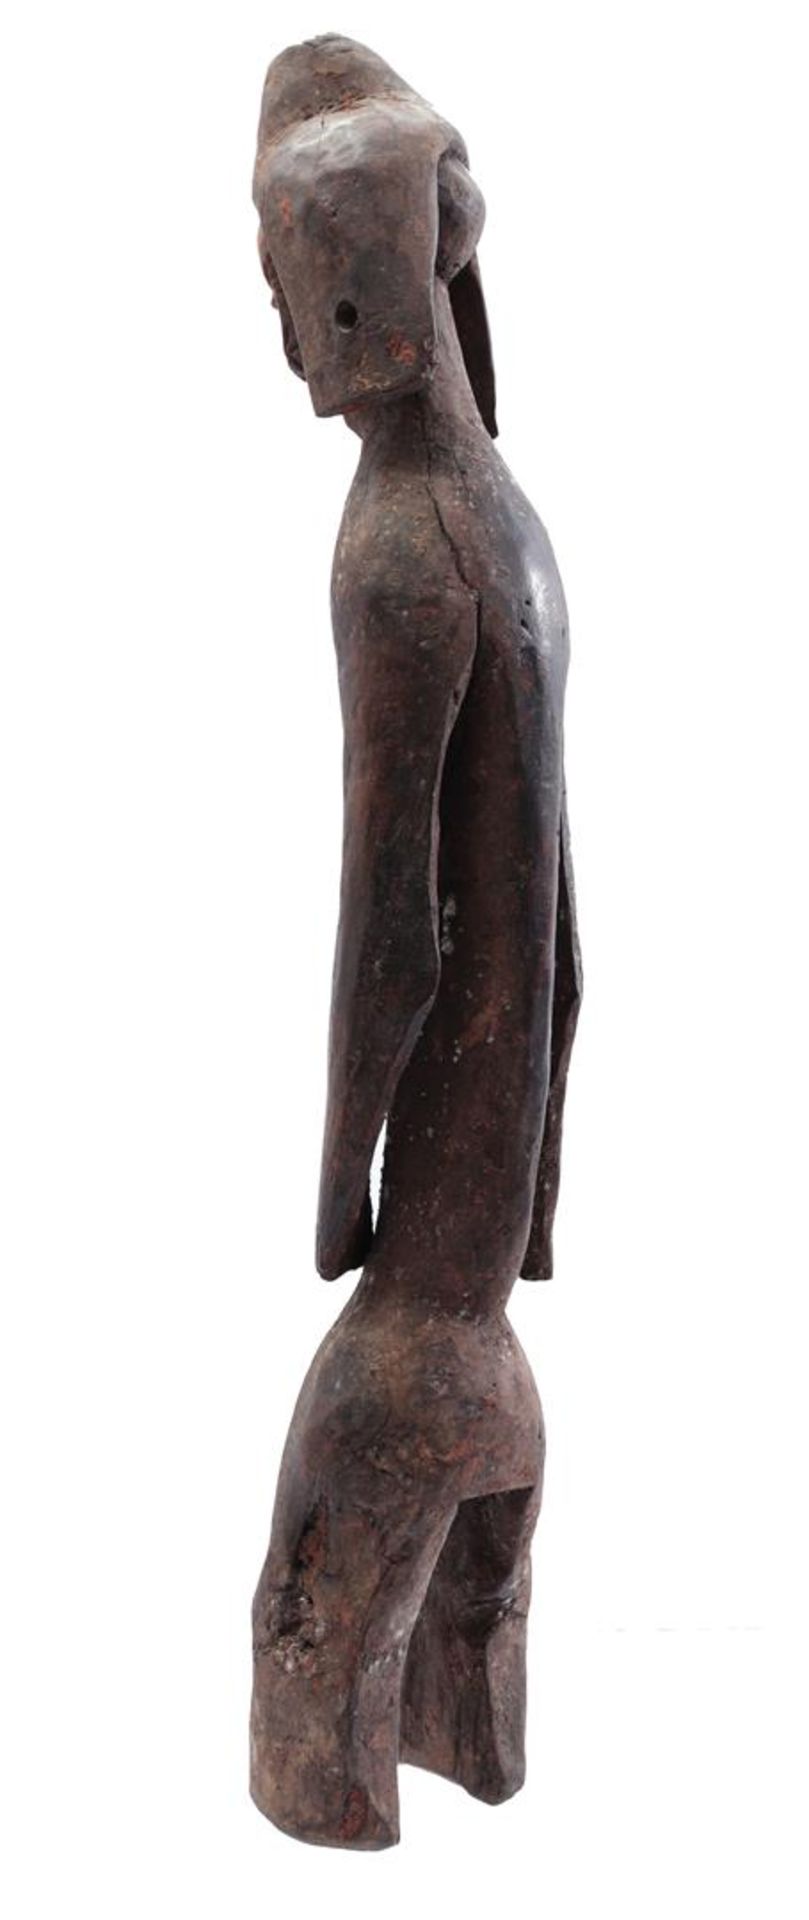 Wooden ceremonial statue of a woman - Image 3 of 5